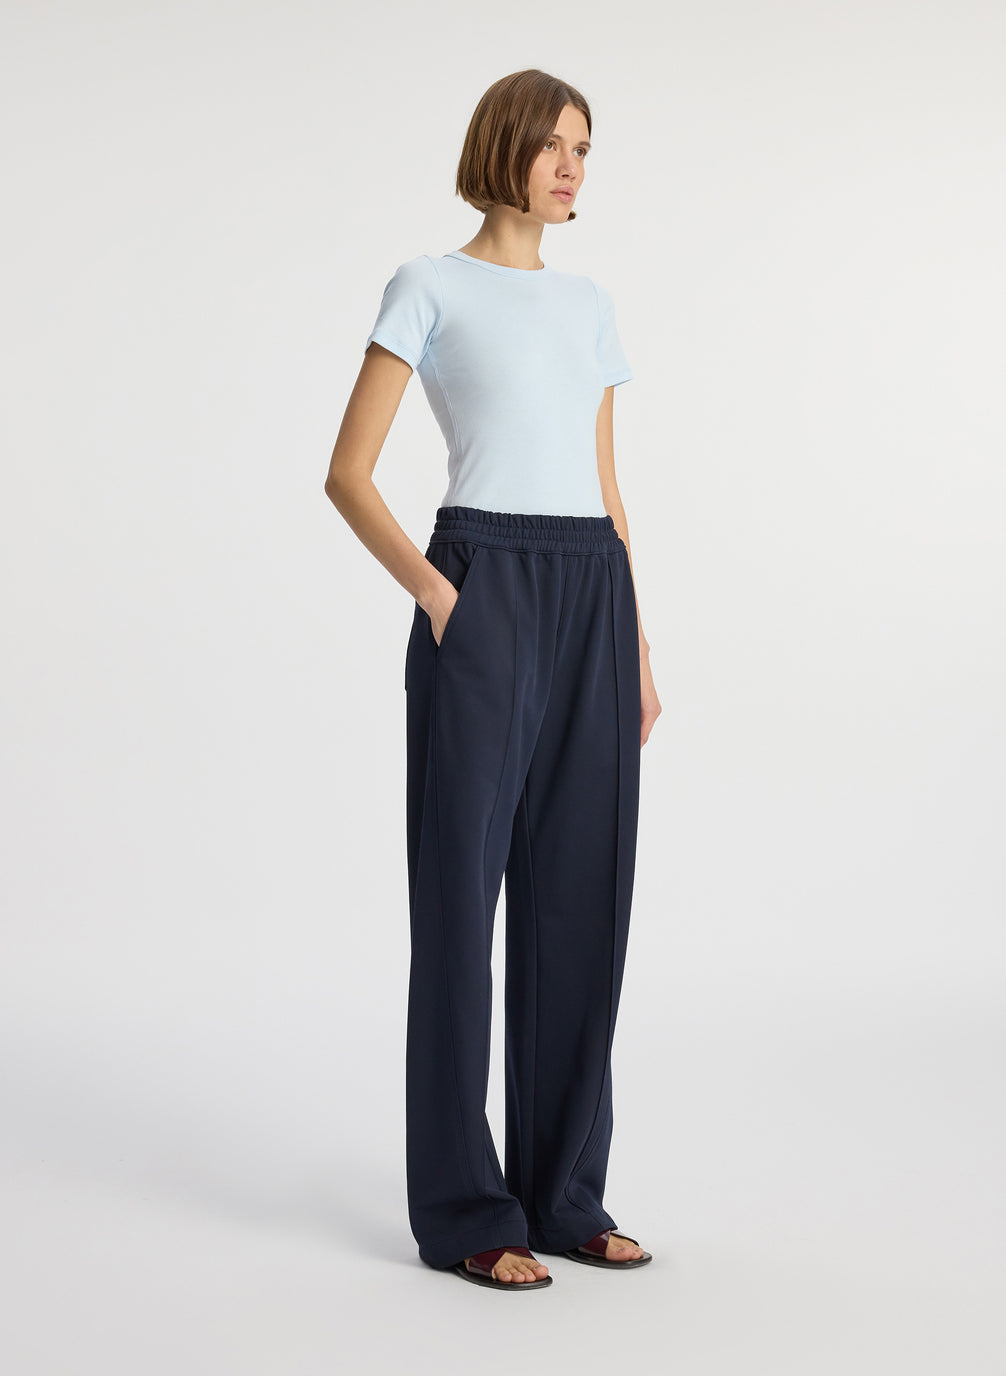 side view of woman wearing light blue tshirt and navy blue pants